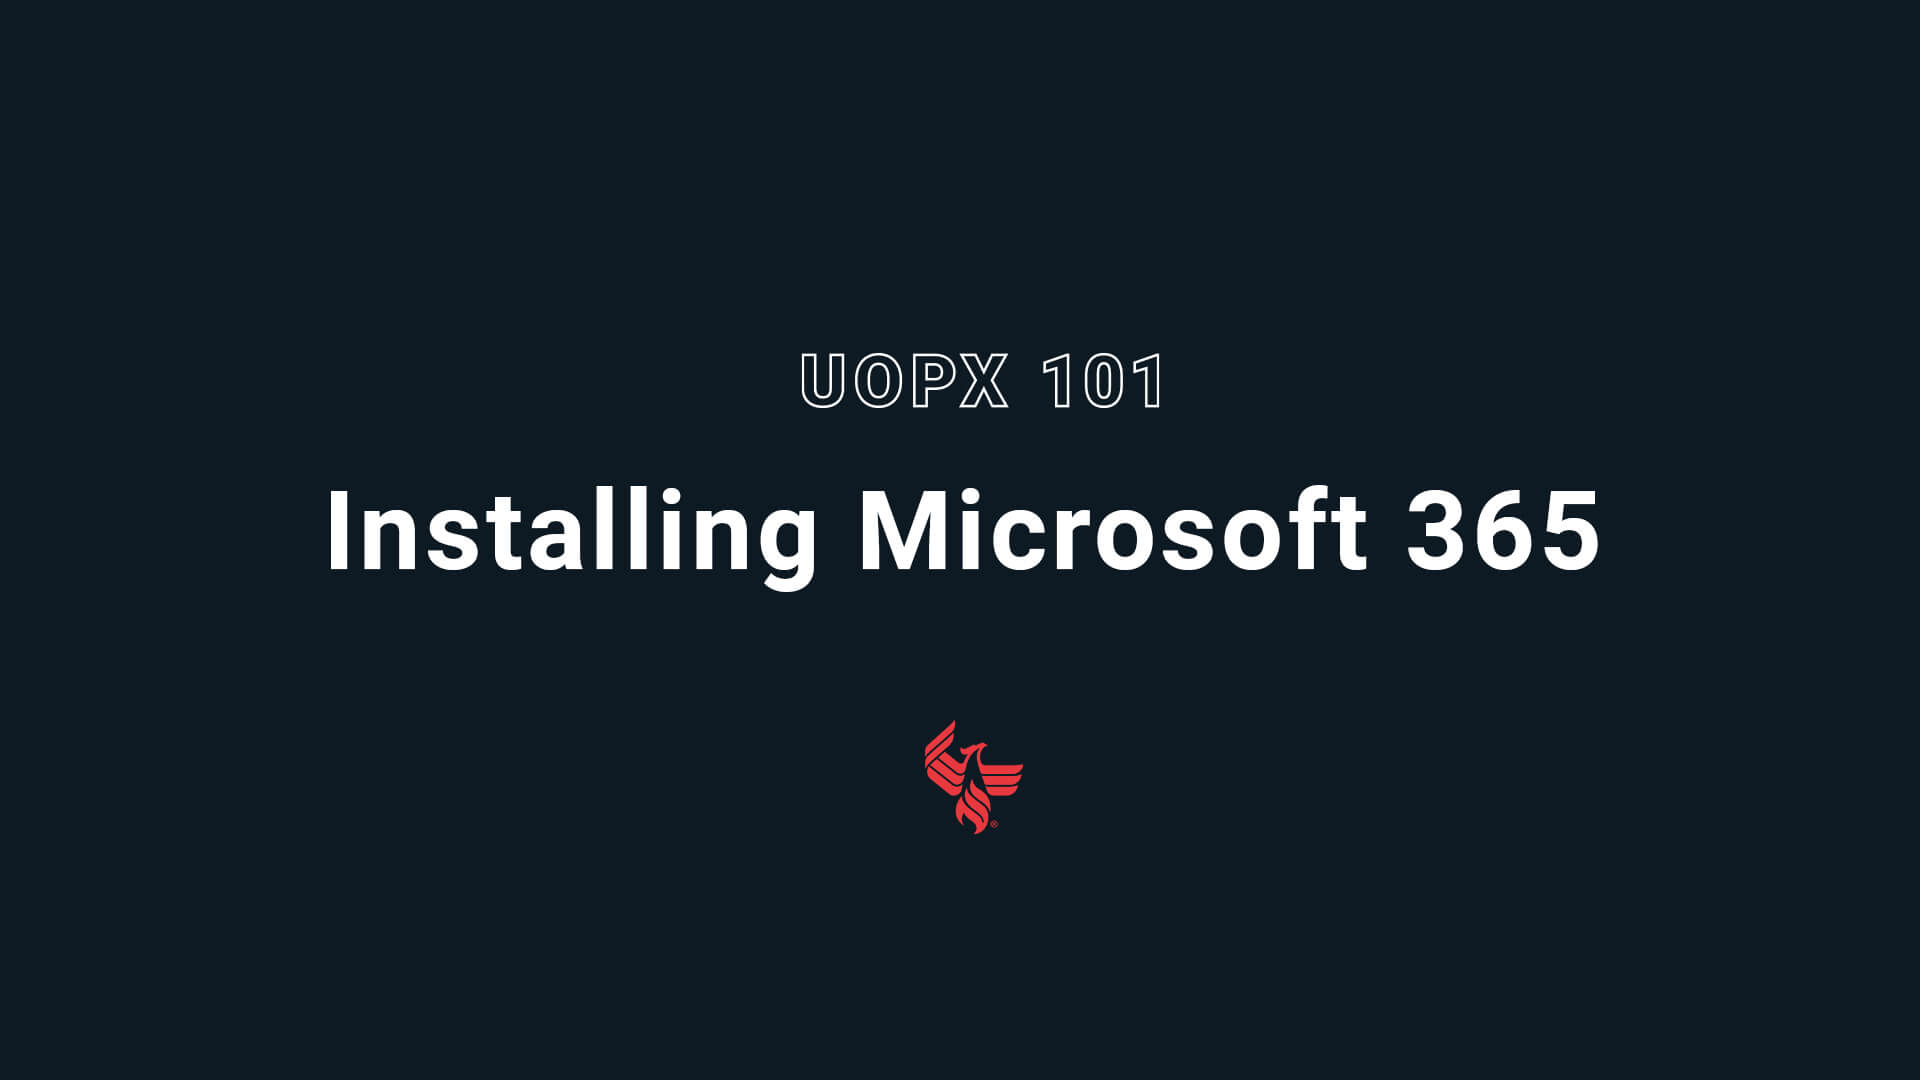 View tips for installing Microsoft 365 on your computer